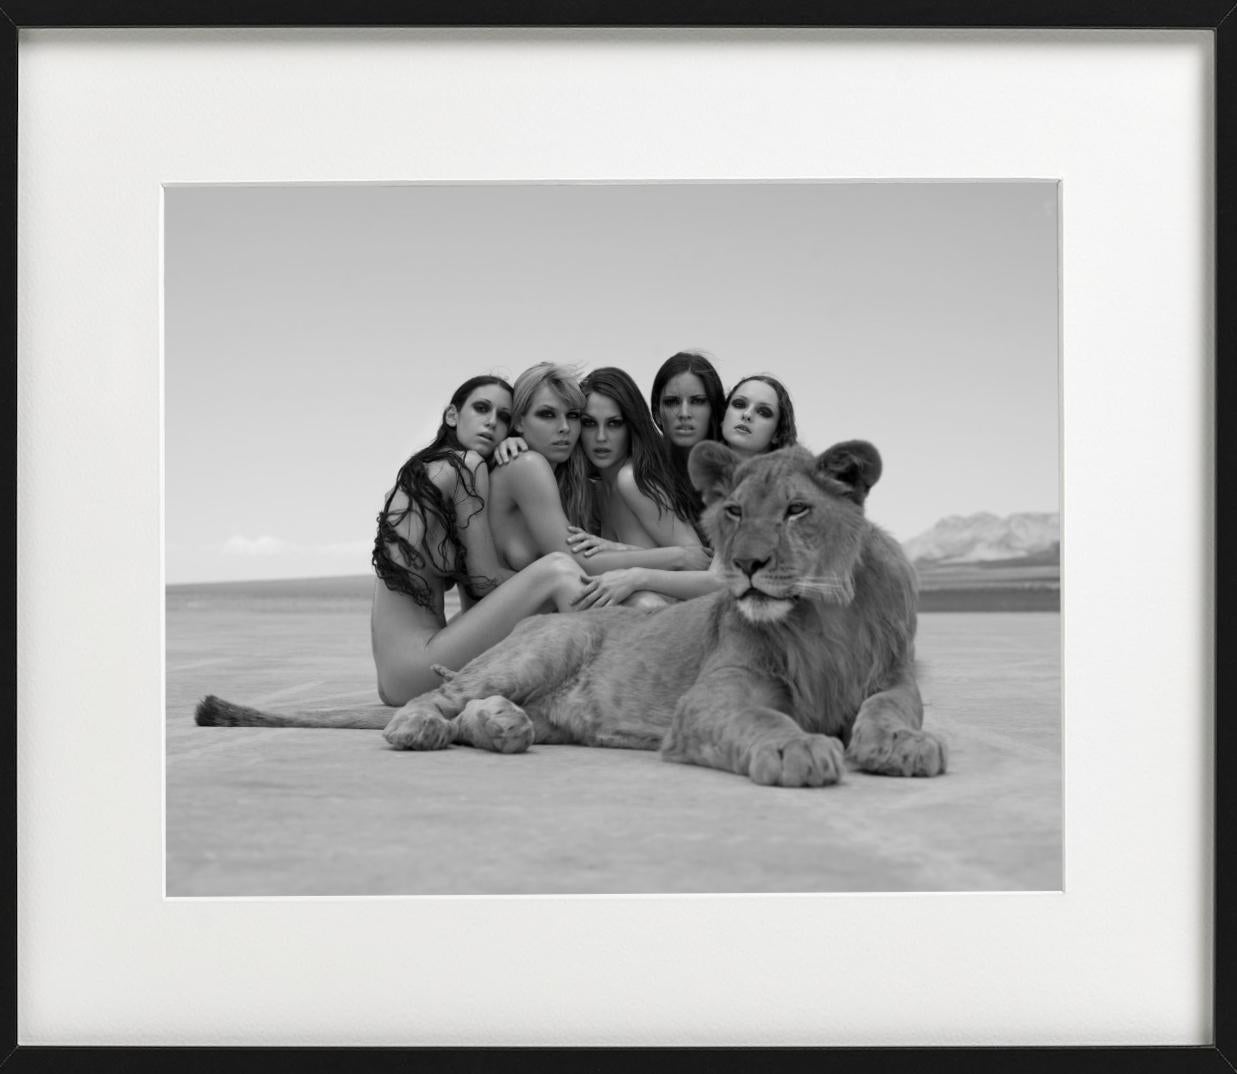 The lion king- group portrait of nude models, posing with a lion in the desert - Photograph by Sylvie Blum